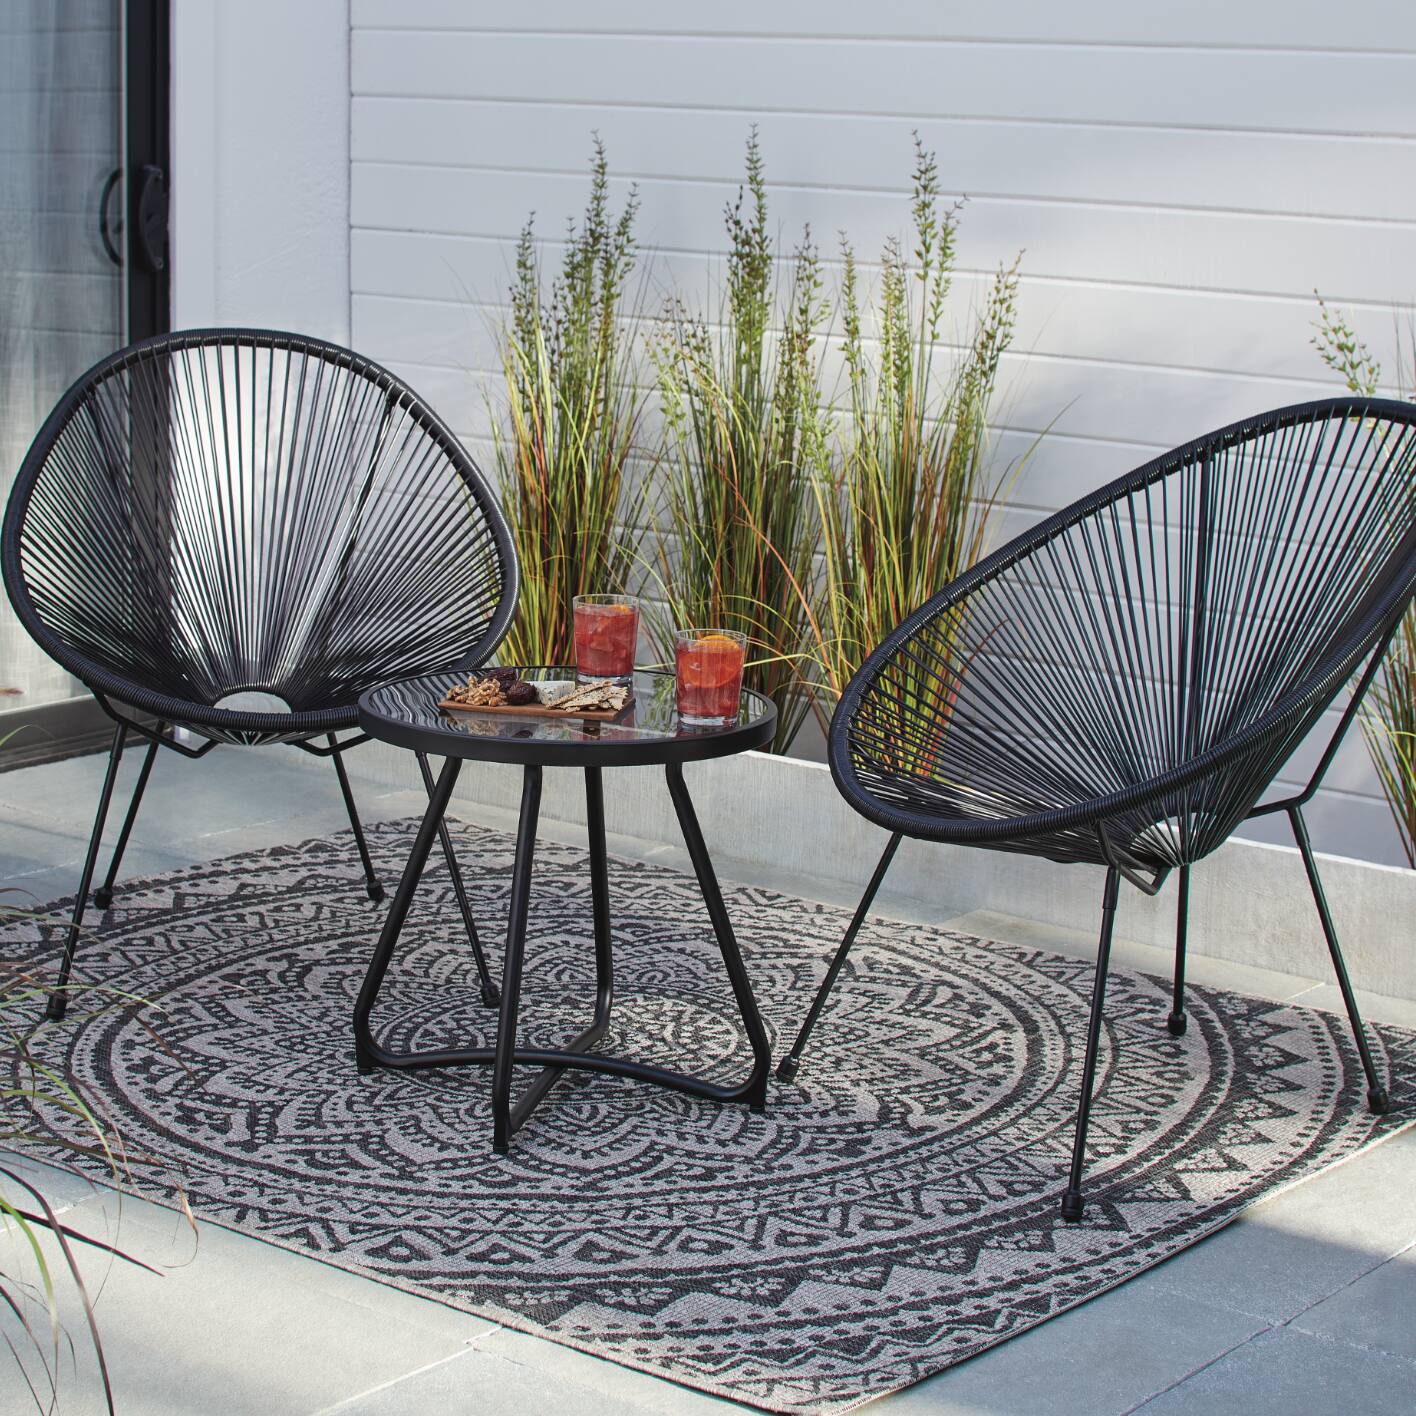 Canvas Acapulco Chat Set including 2 chairs and a table in black set up on a patio.